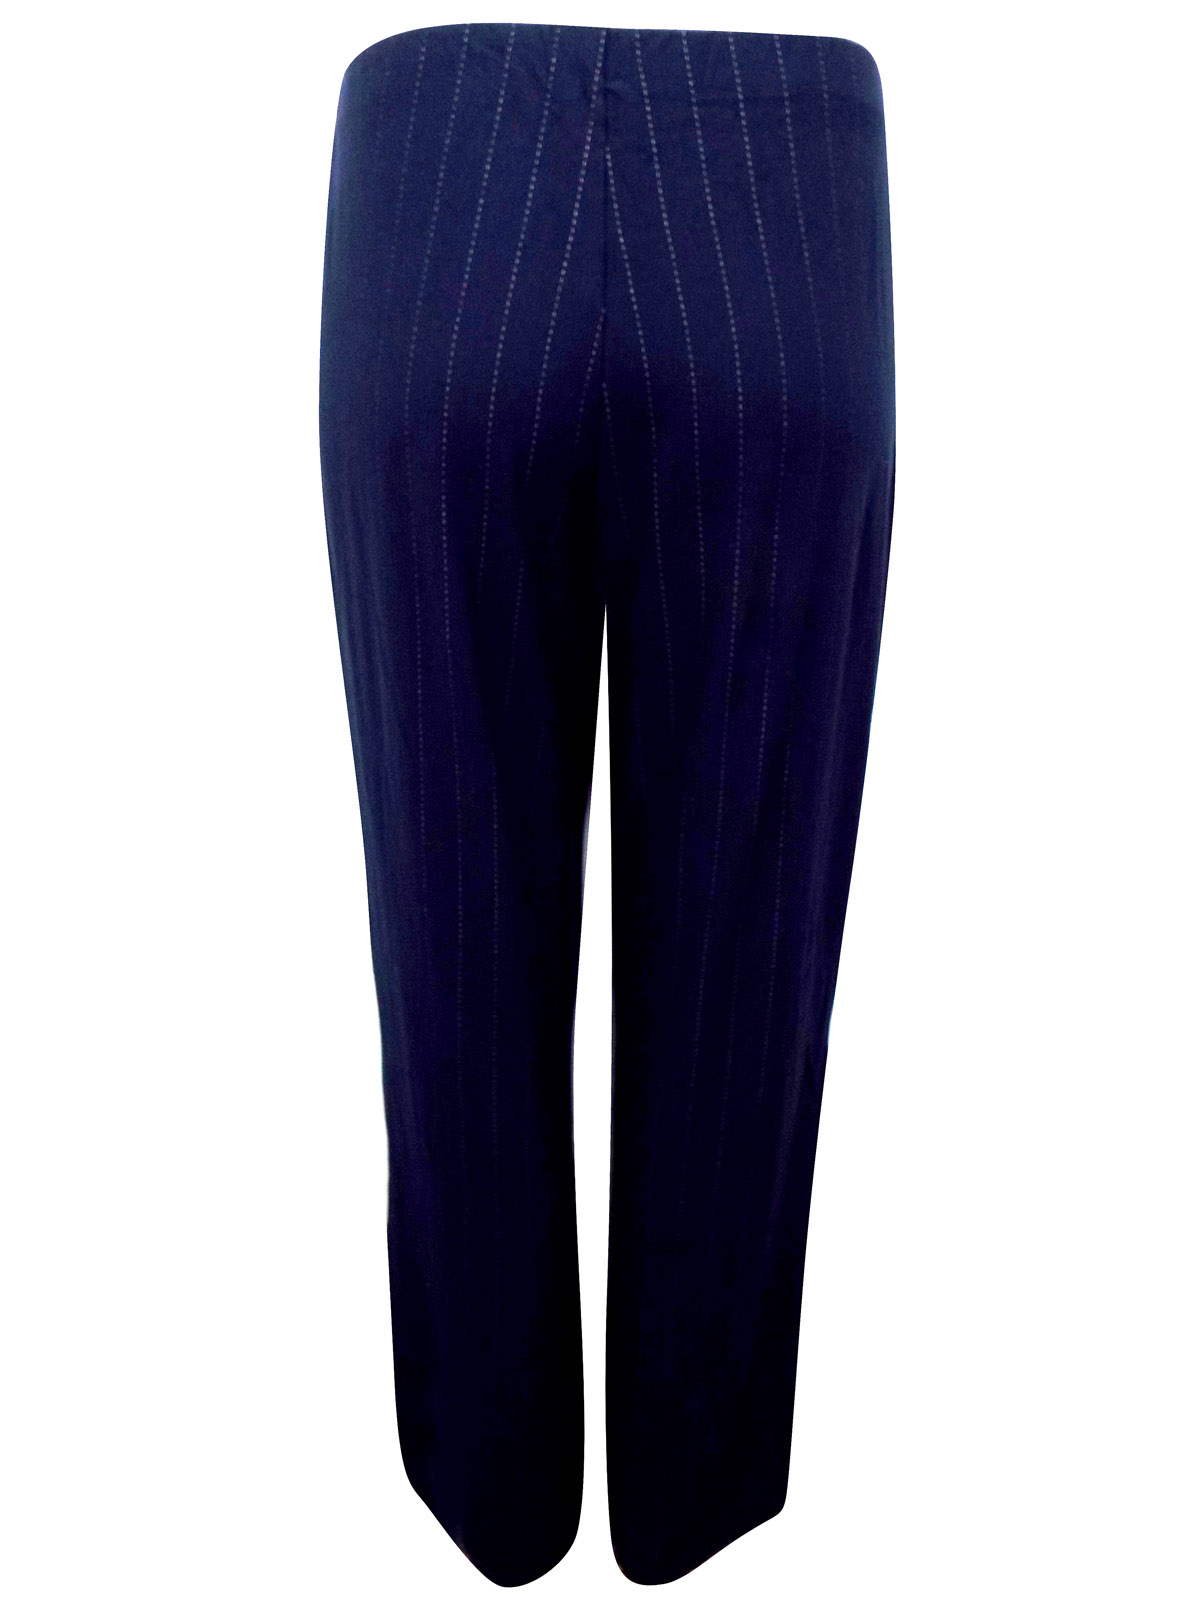 Marks and Spencer - - M&5 NAVY Wide Leg Pinstriped Trousers - Size 12 to 18